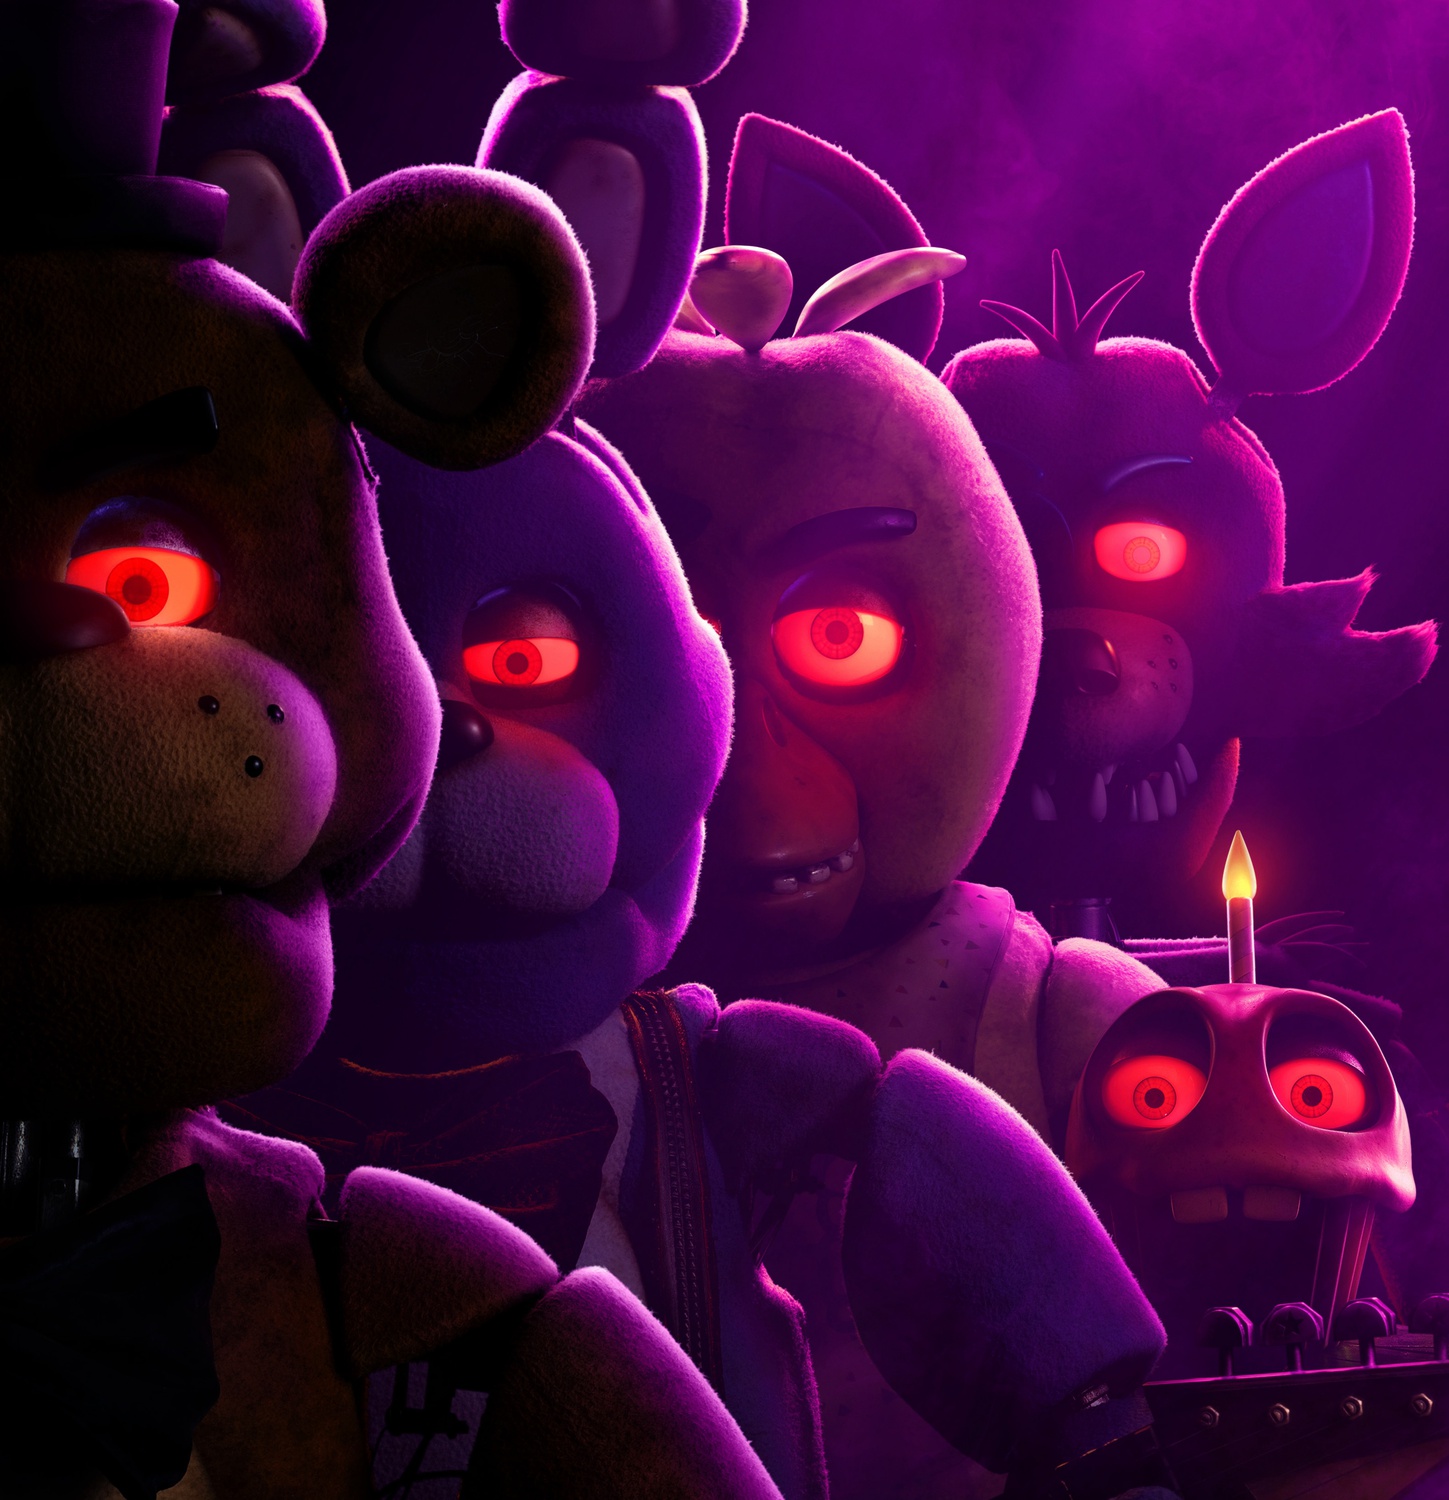 Freddy, Chica, Bonne, and Foxy in "Five Nights at Freddy's" Poster